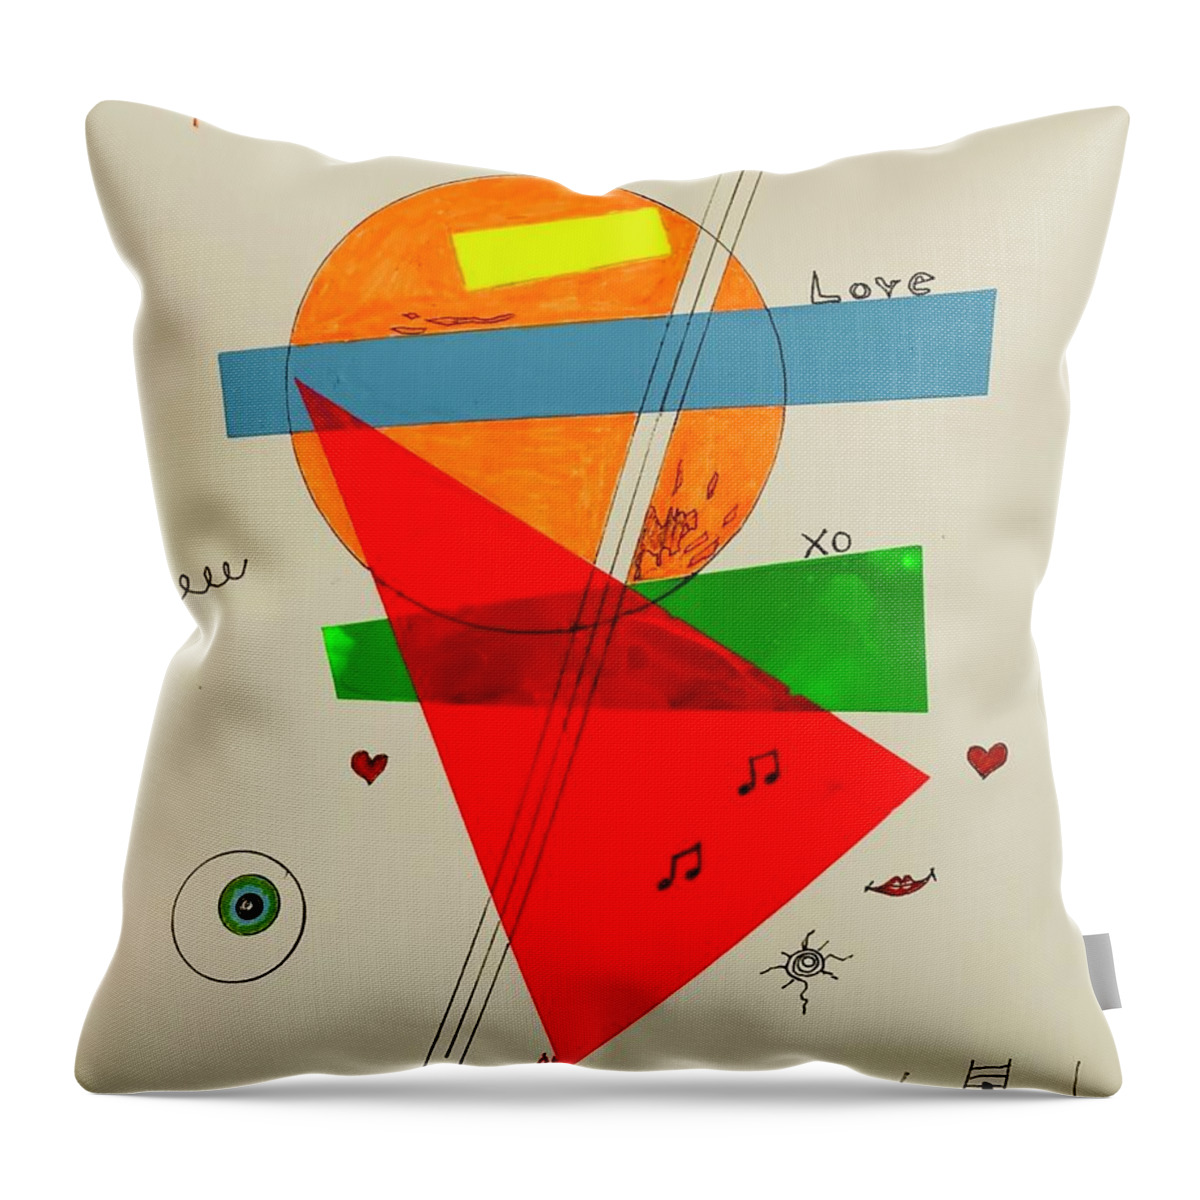  Throw Pillow featuring the mixed media Love xo Green Under Red 111414 by Lew Hagood